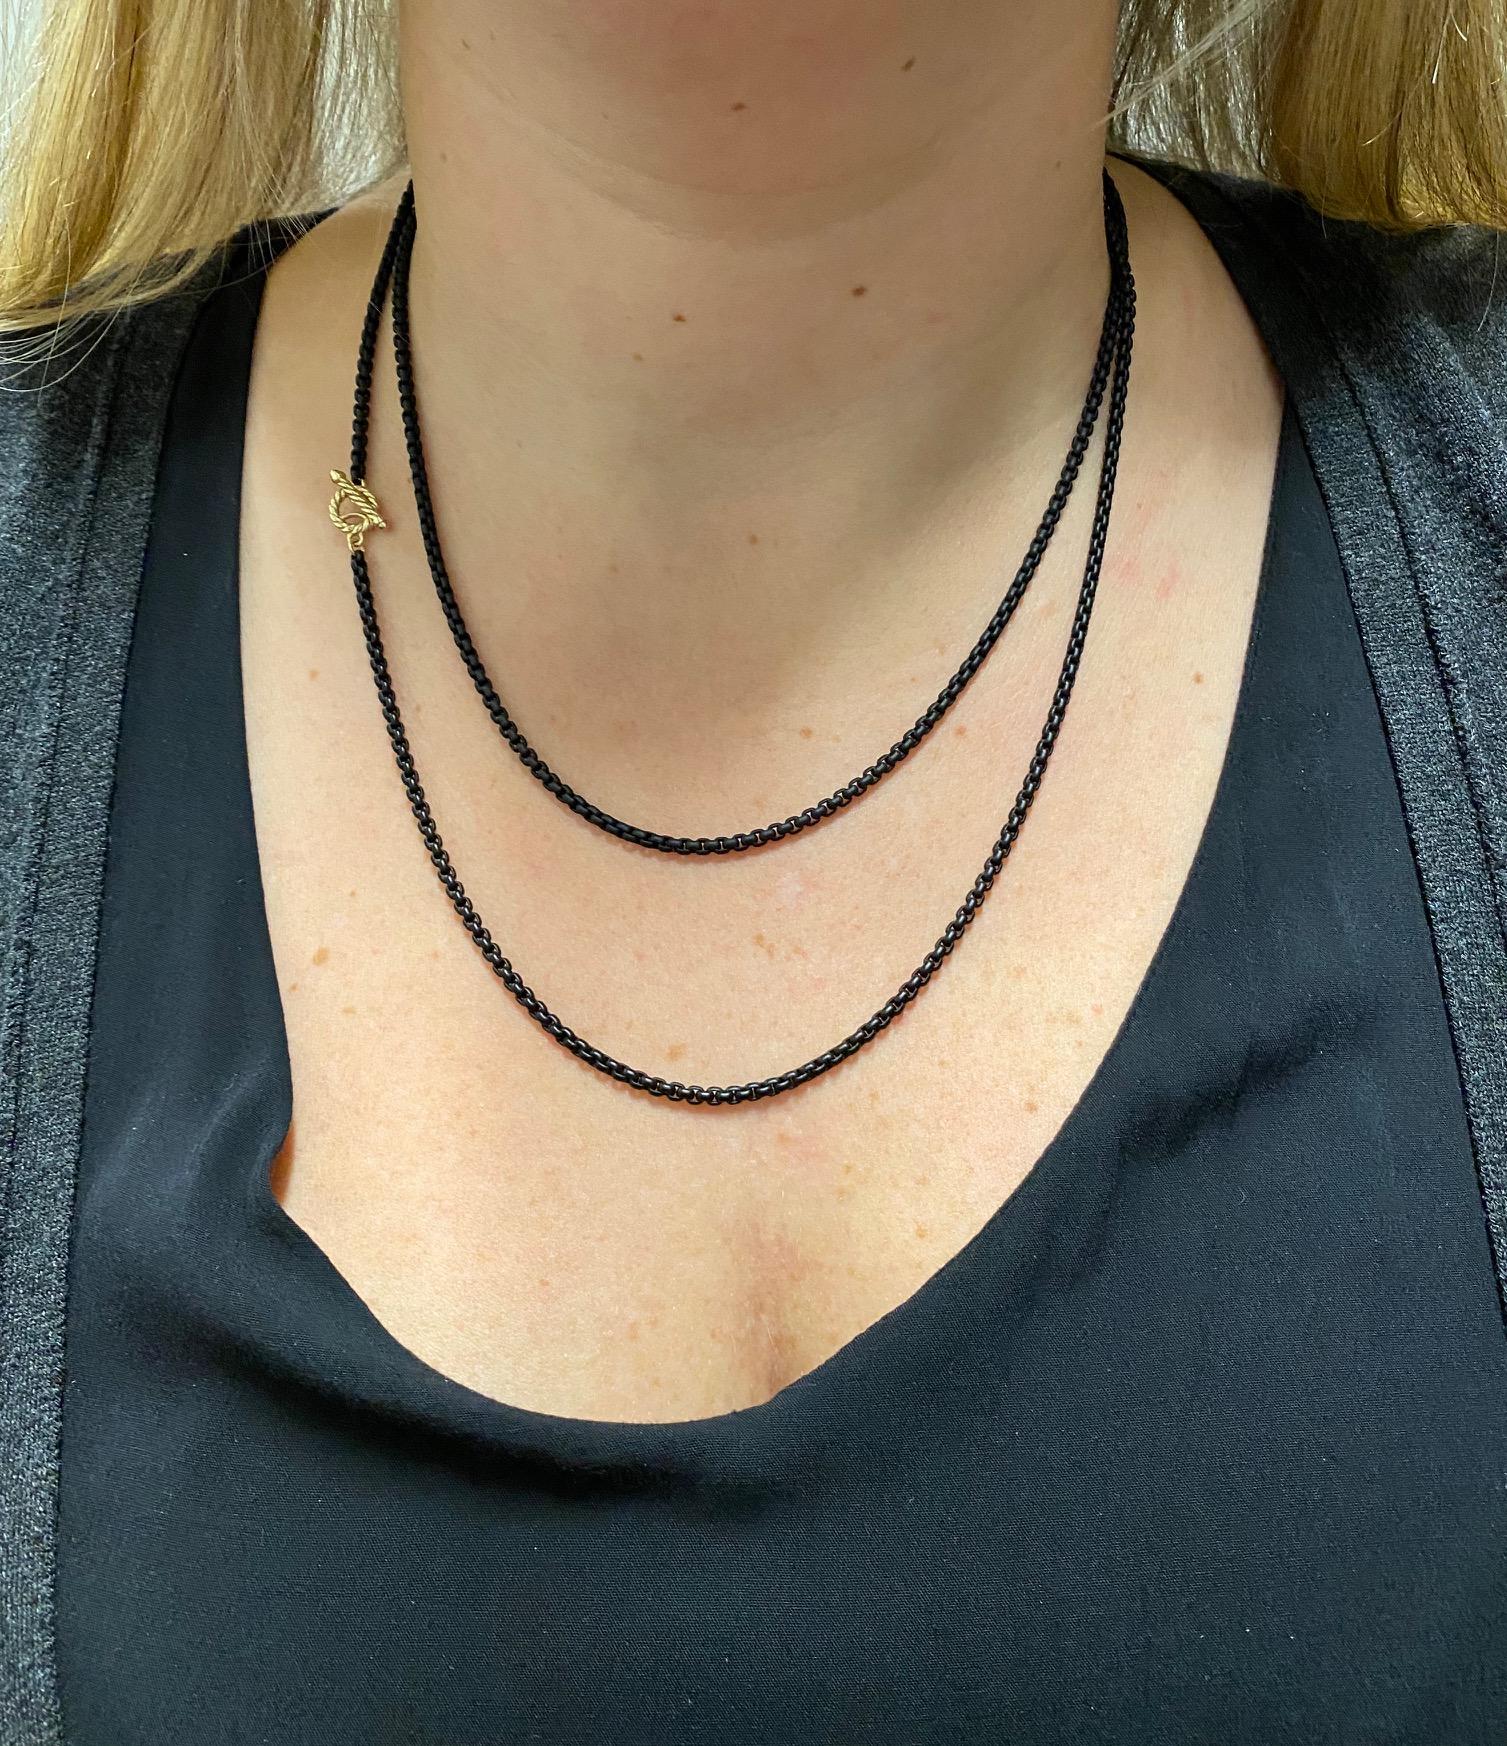 Women's or Men's David Yurman Bel Aire Black Acrylic Chain Necklace with 14 Karat Gold Accents